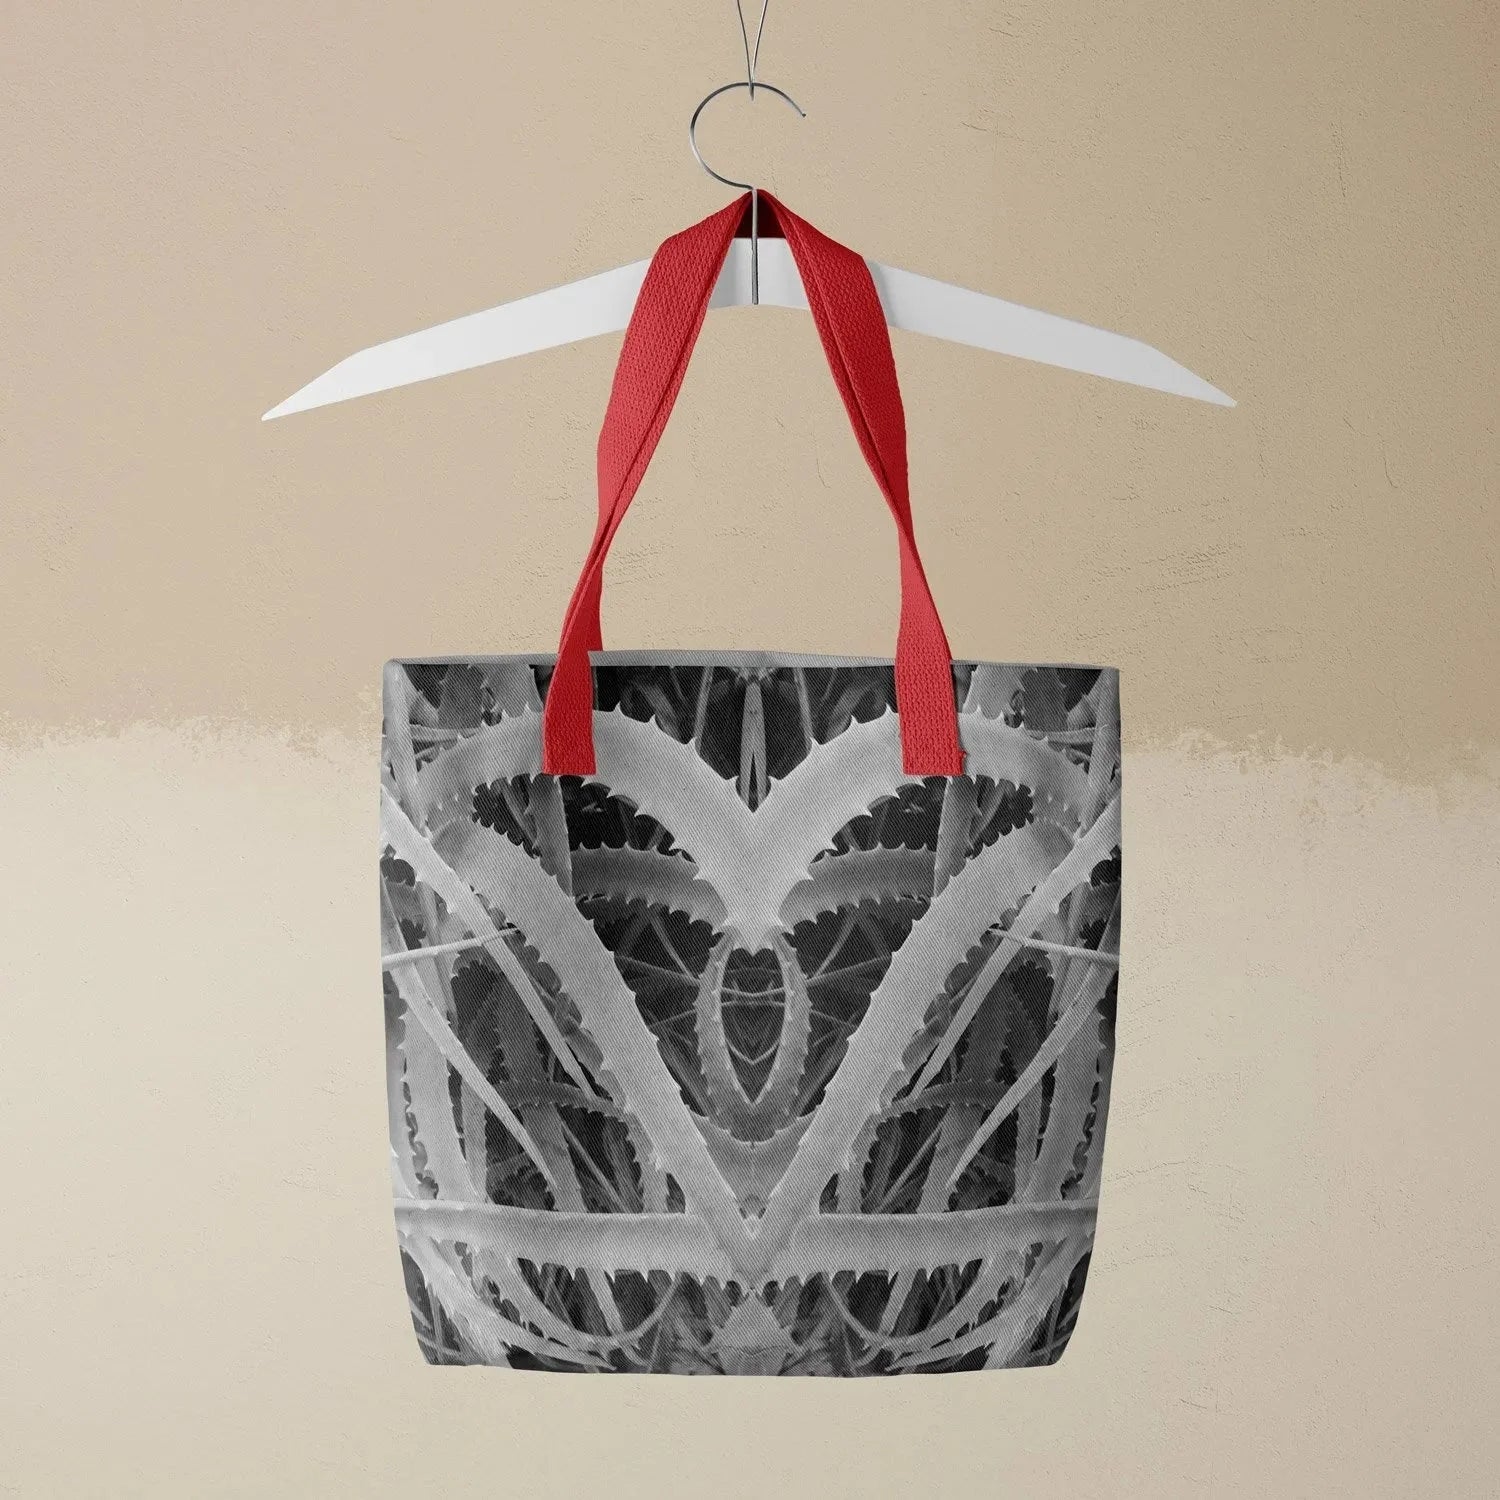 Spiked Tote - Black And White - Heavy Duty Reusable Grocery Bag - Red Handles - Shopping Totes - Aesthetic Art